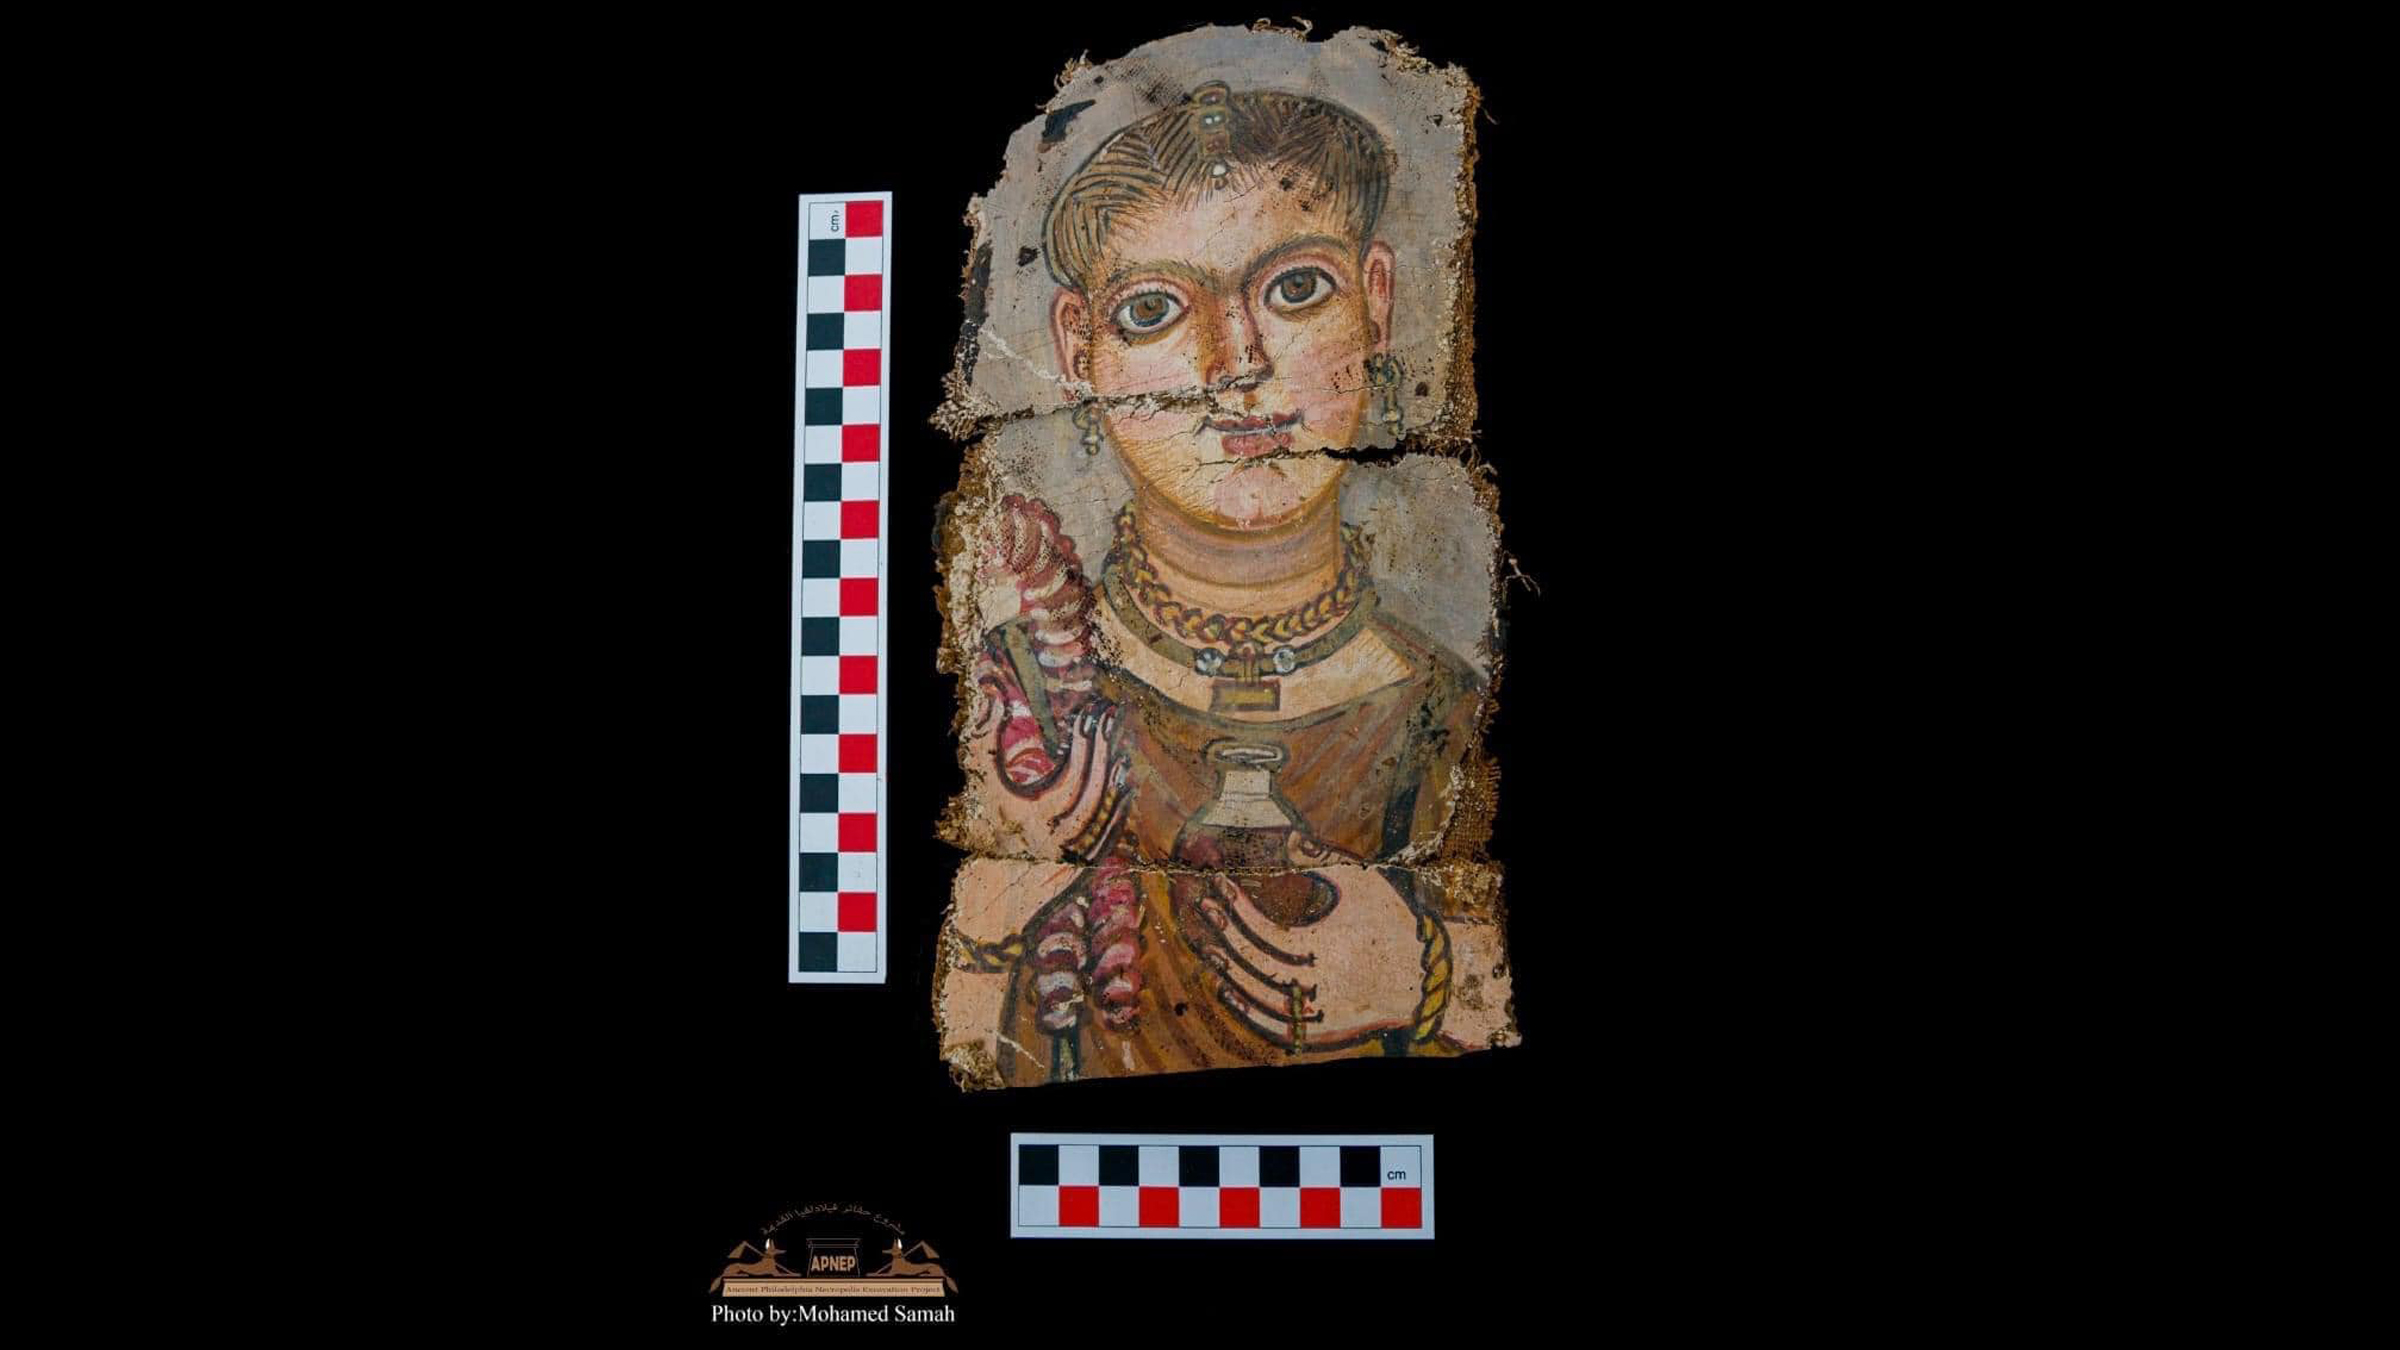 One of the newly discovered mummy portraits, seen here, is painted on a linen cloth.